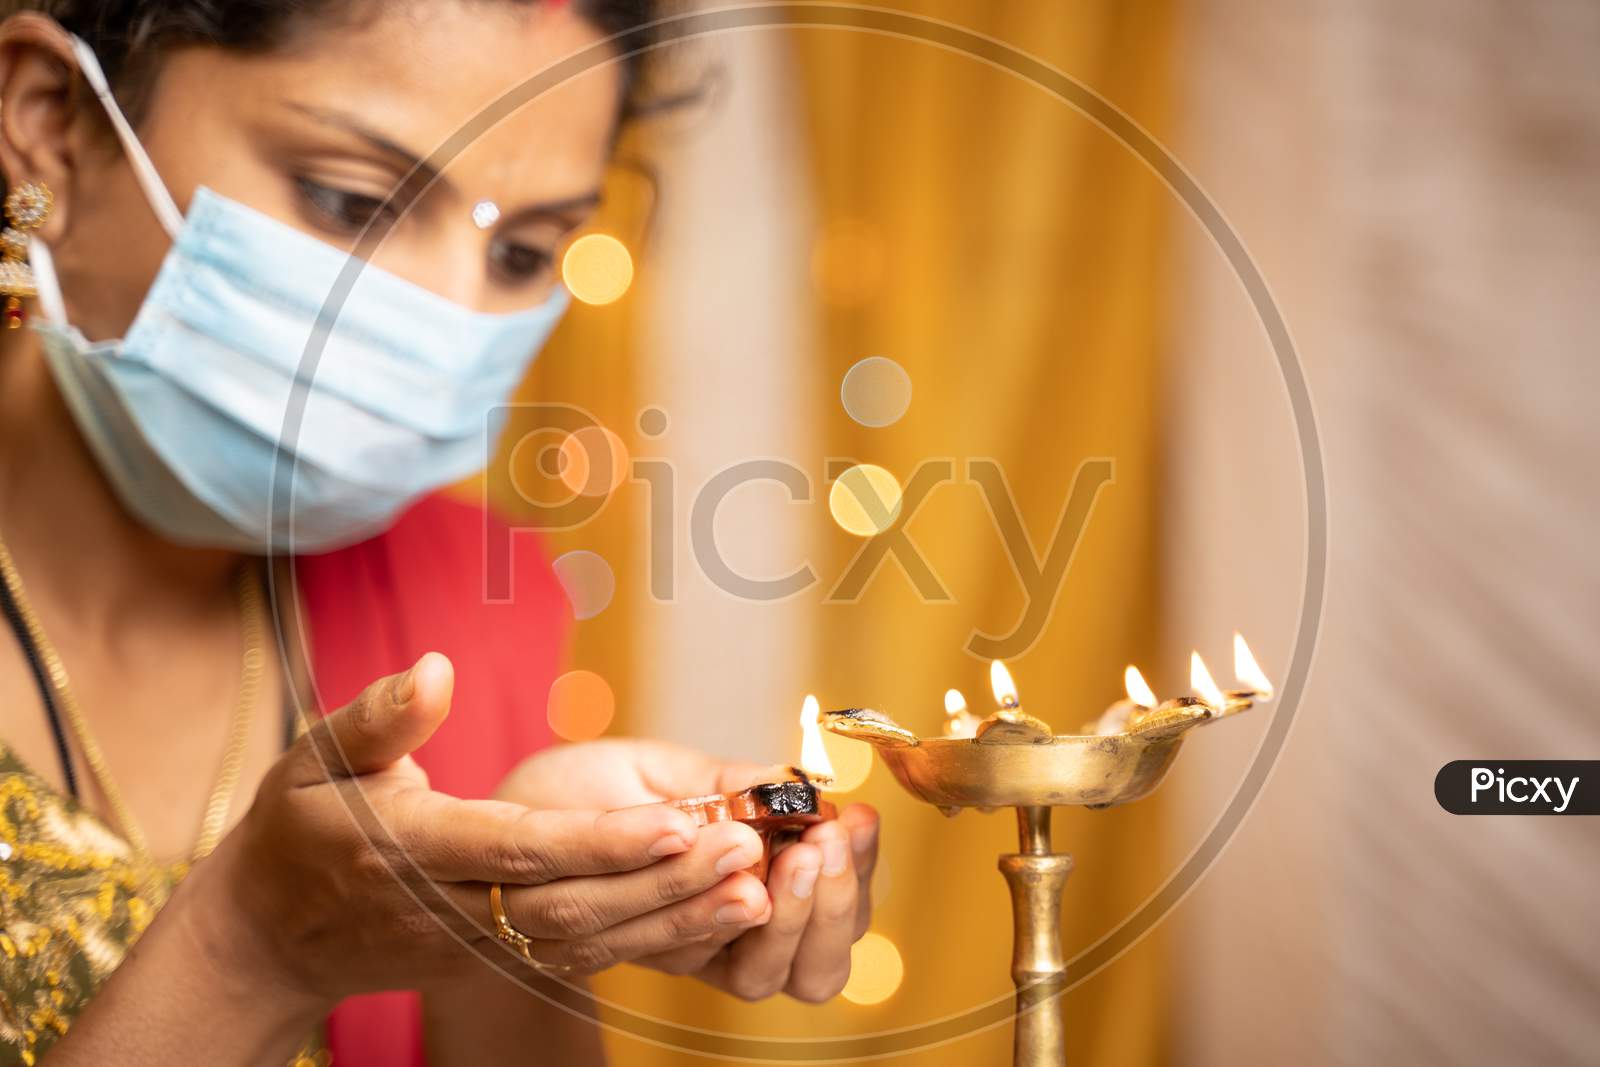 Selective Focus On Hands, Indian Woman In Medical Mask Lighting Lantern Or Diya Lamp During Festival At Home - Concept Of Traditional Festival Celebrations During Coronavirus Or Covid-19 Pandemic